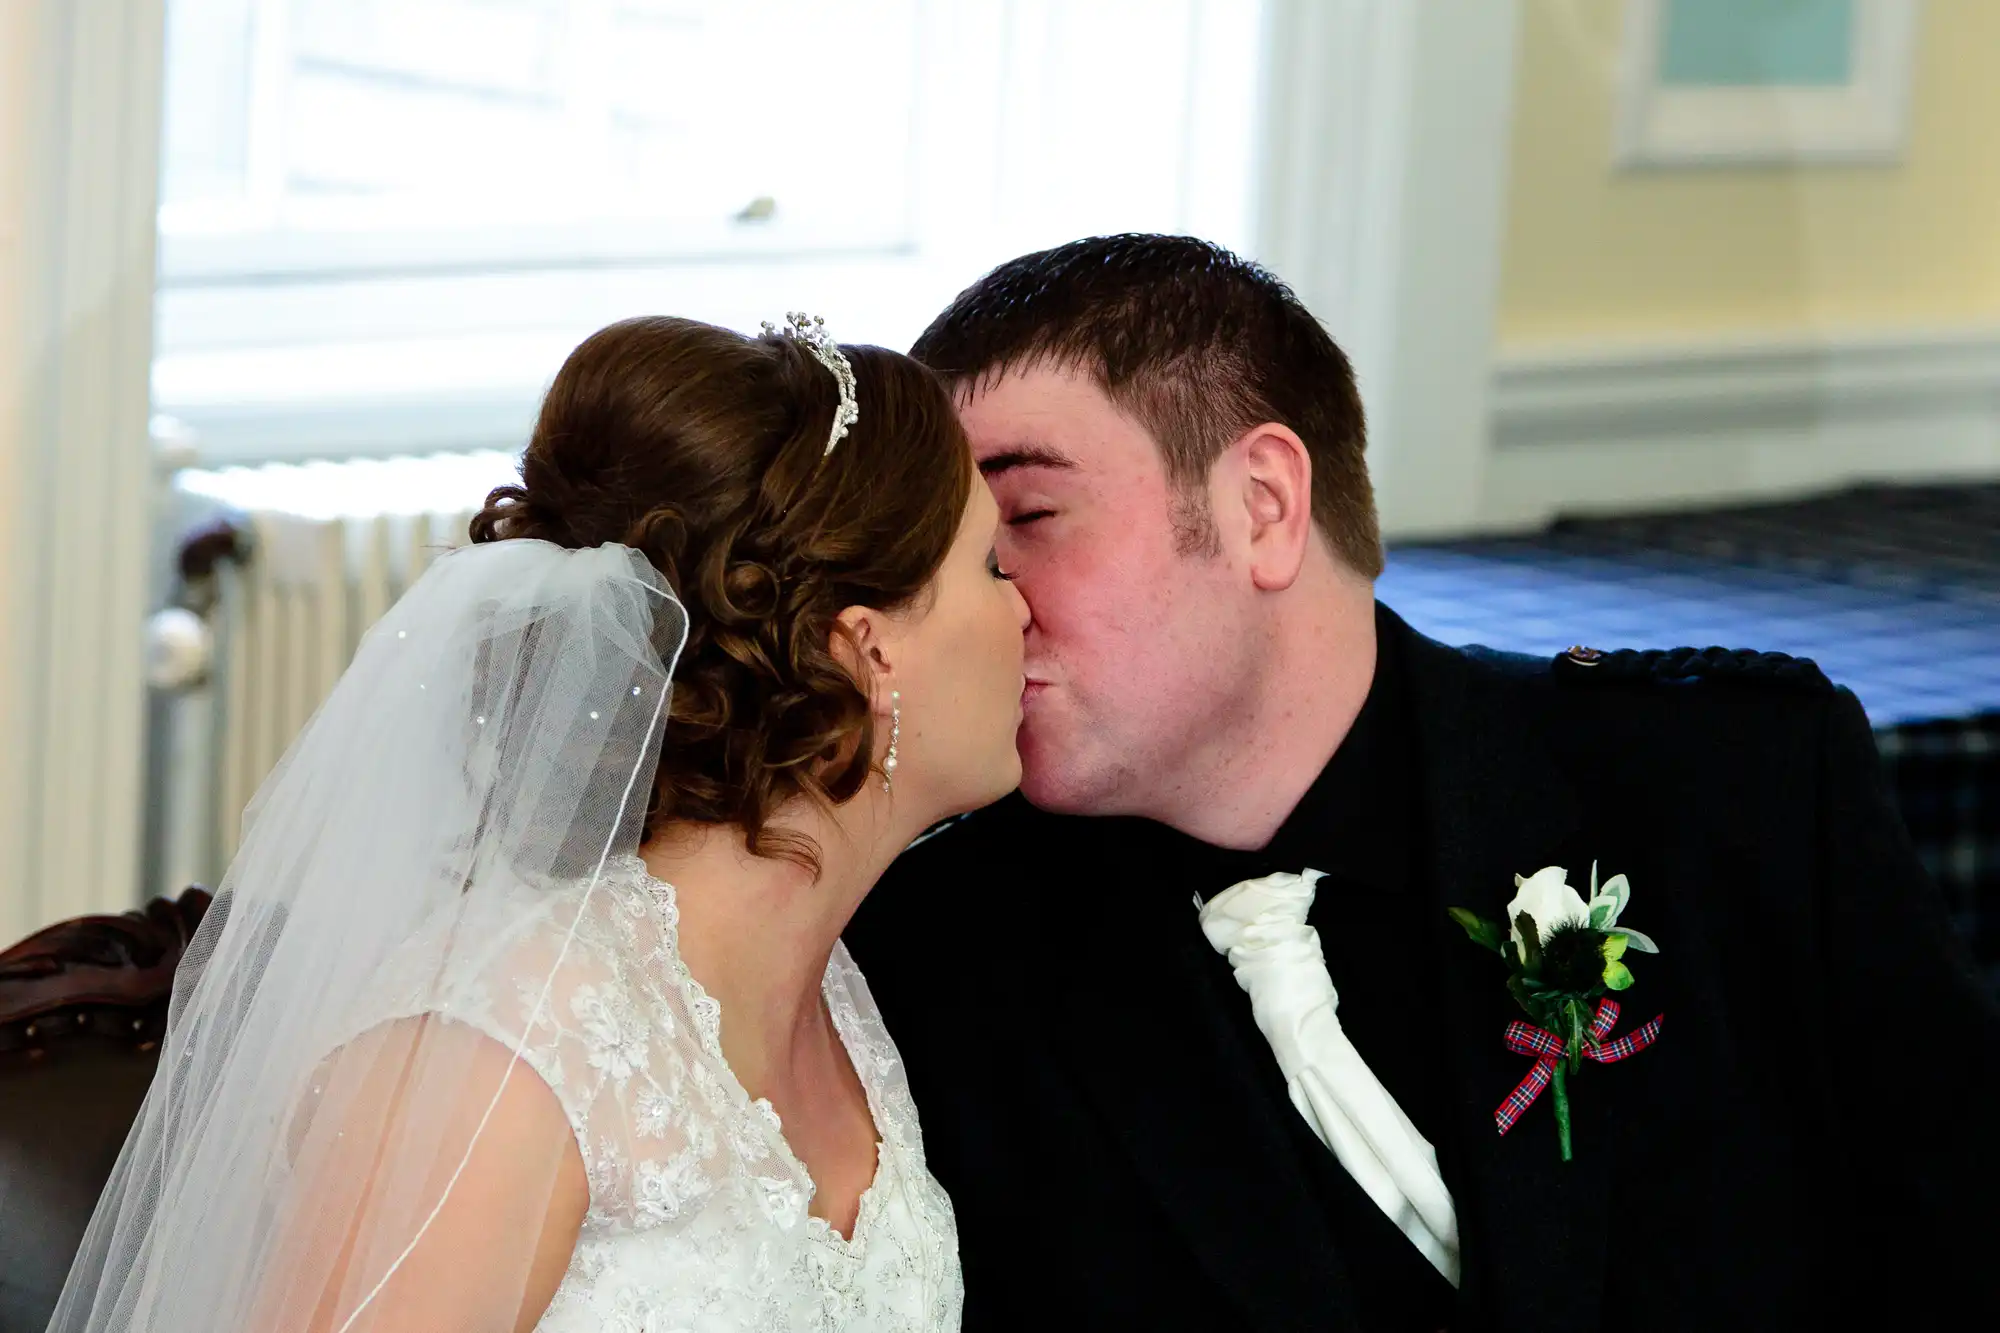 A bride and groom kissing, dressed in traditional wedding attire, indoors with natural light coming through windows in the background.